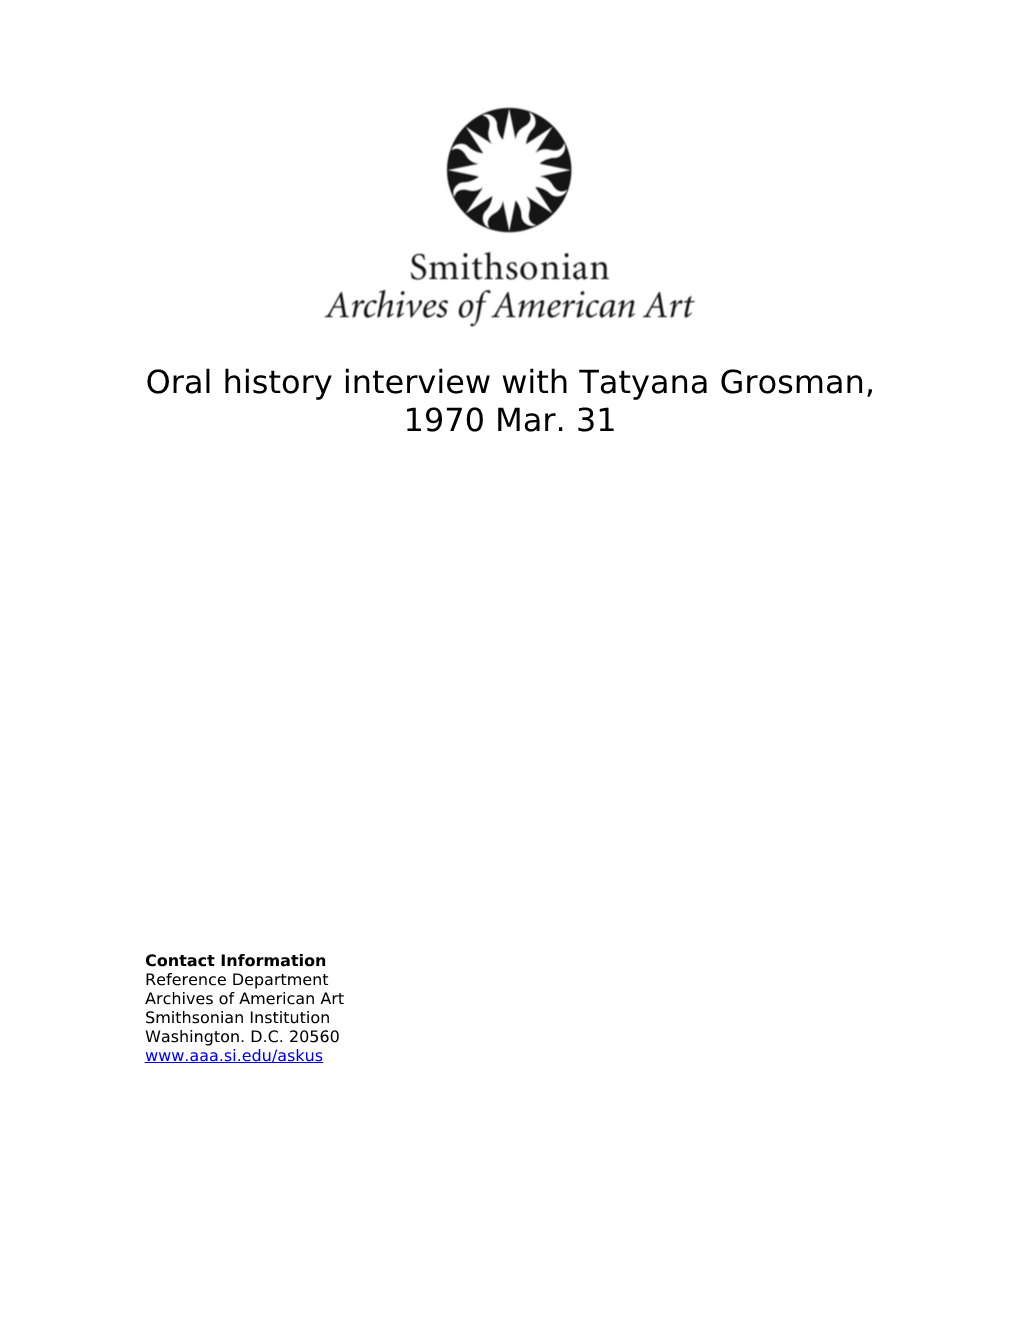 Oral History Interview with Tatyana Grosman, 1970 Mar. 31